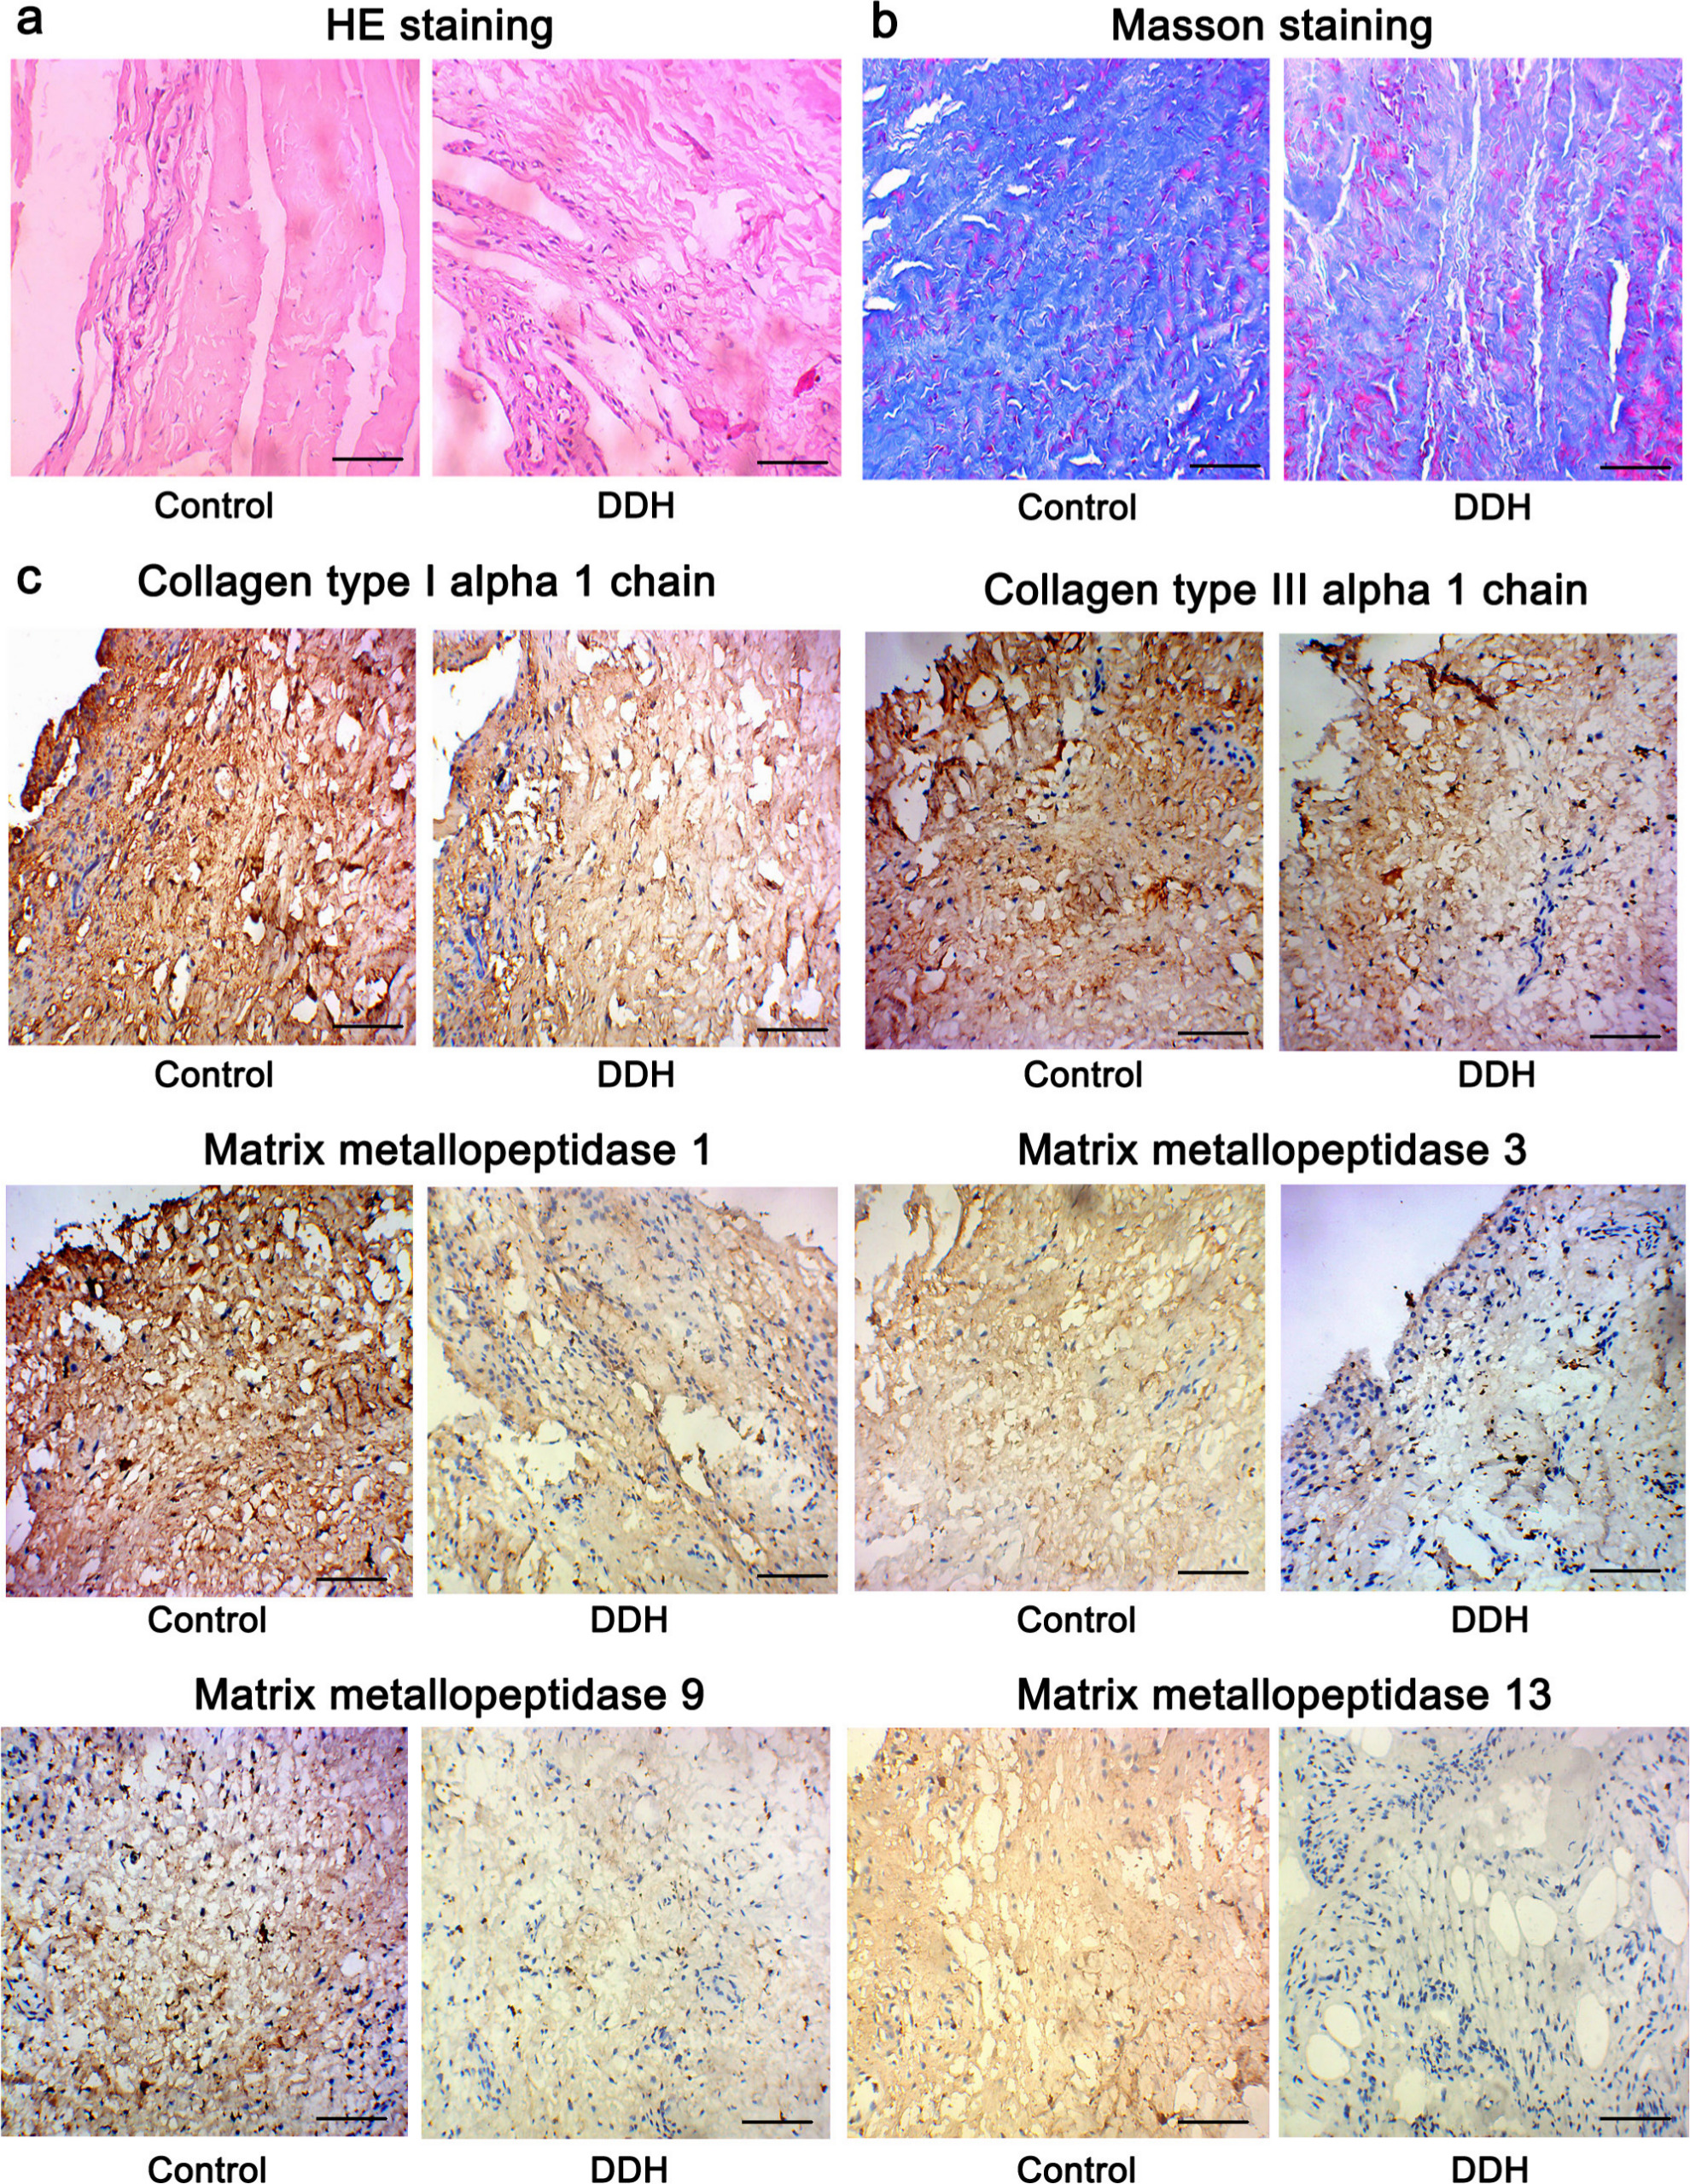 Fig. 2 
            Histological examinations using haematoxylin and eosin (HE), Masson’s, and immunohistochemistry staining (200×). Tissues from the hip joint capsule from patients with developmental dysplasia of the hip (DDH) and healthy controls were subjected to a) HE, b) Masson’s, and c) immunohistochemistry staining. Bar: 10 μm.
          